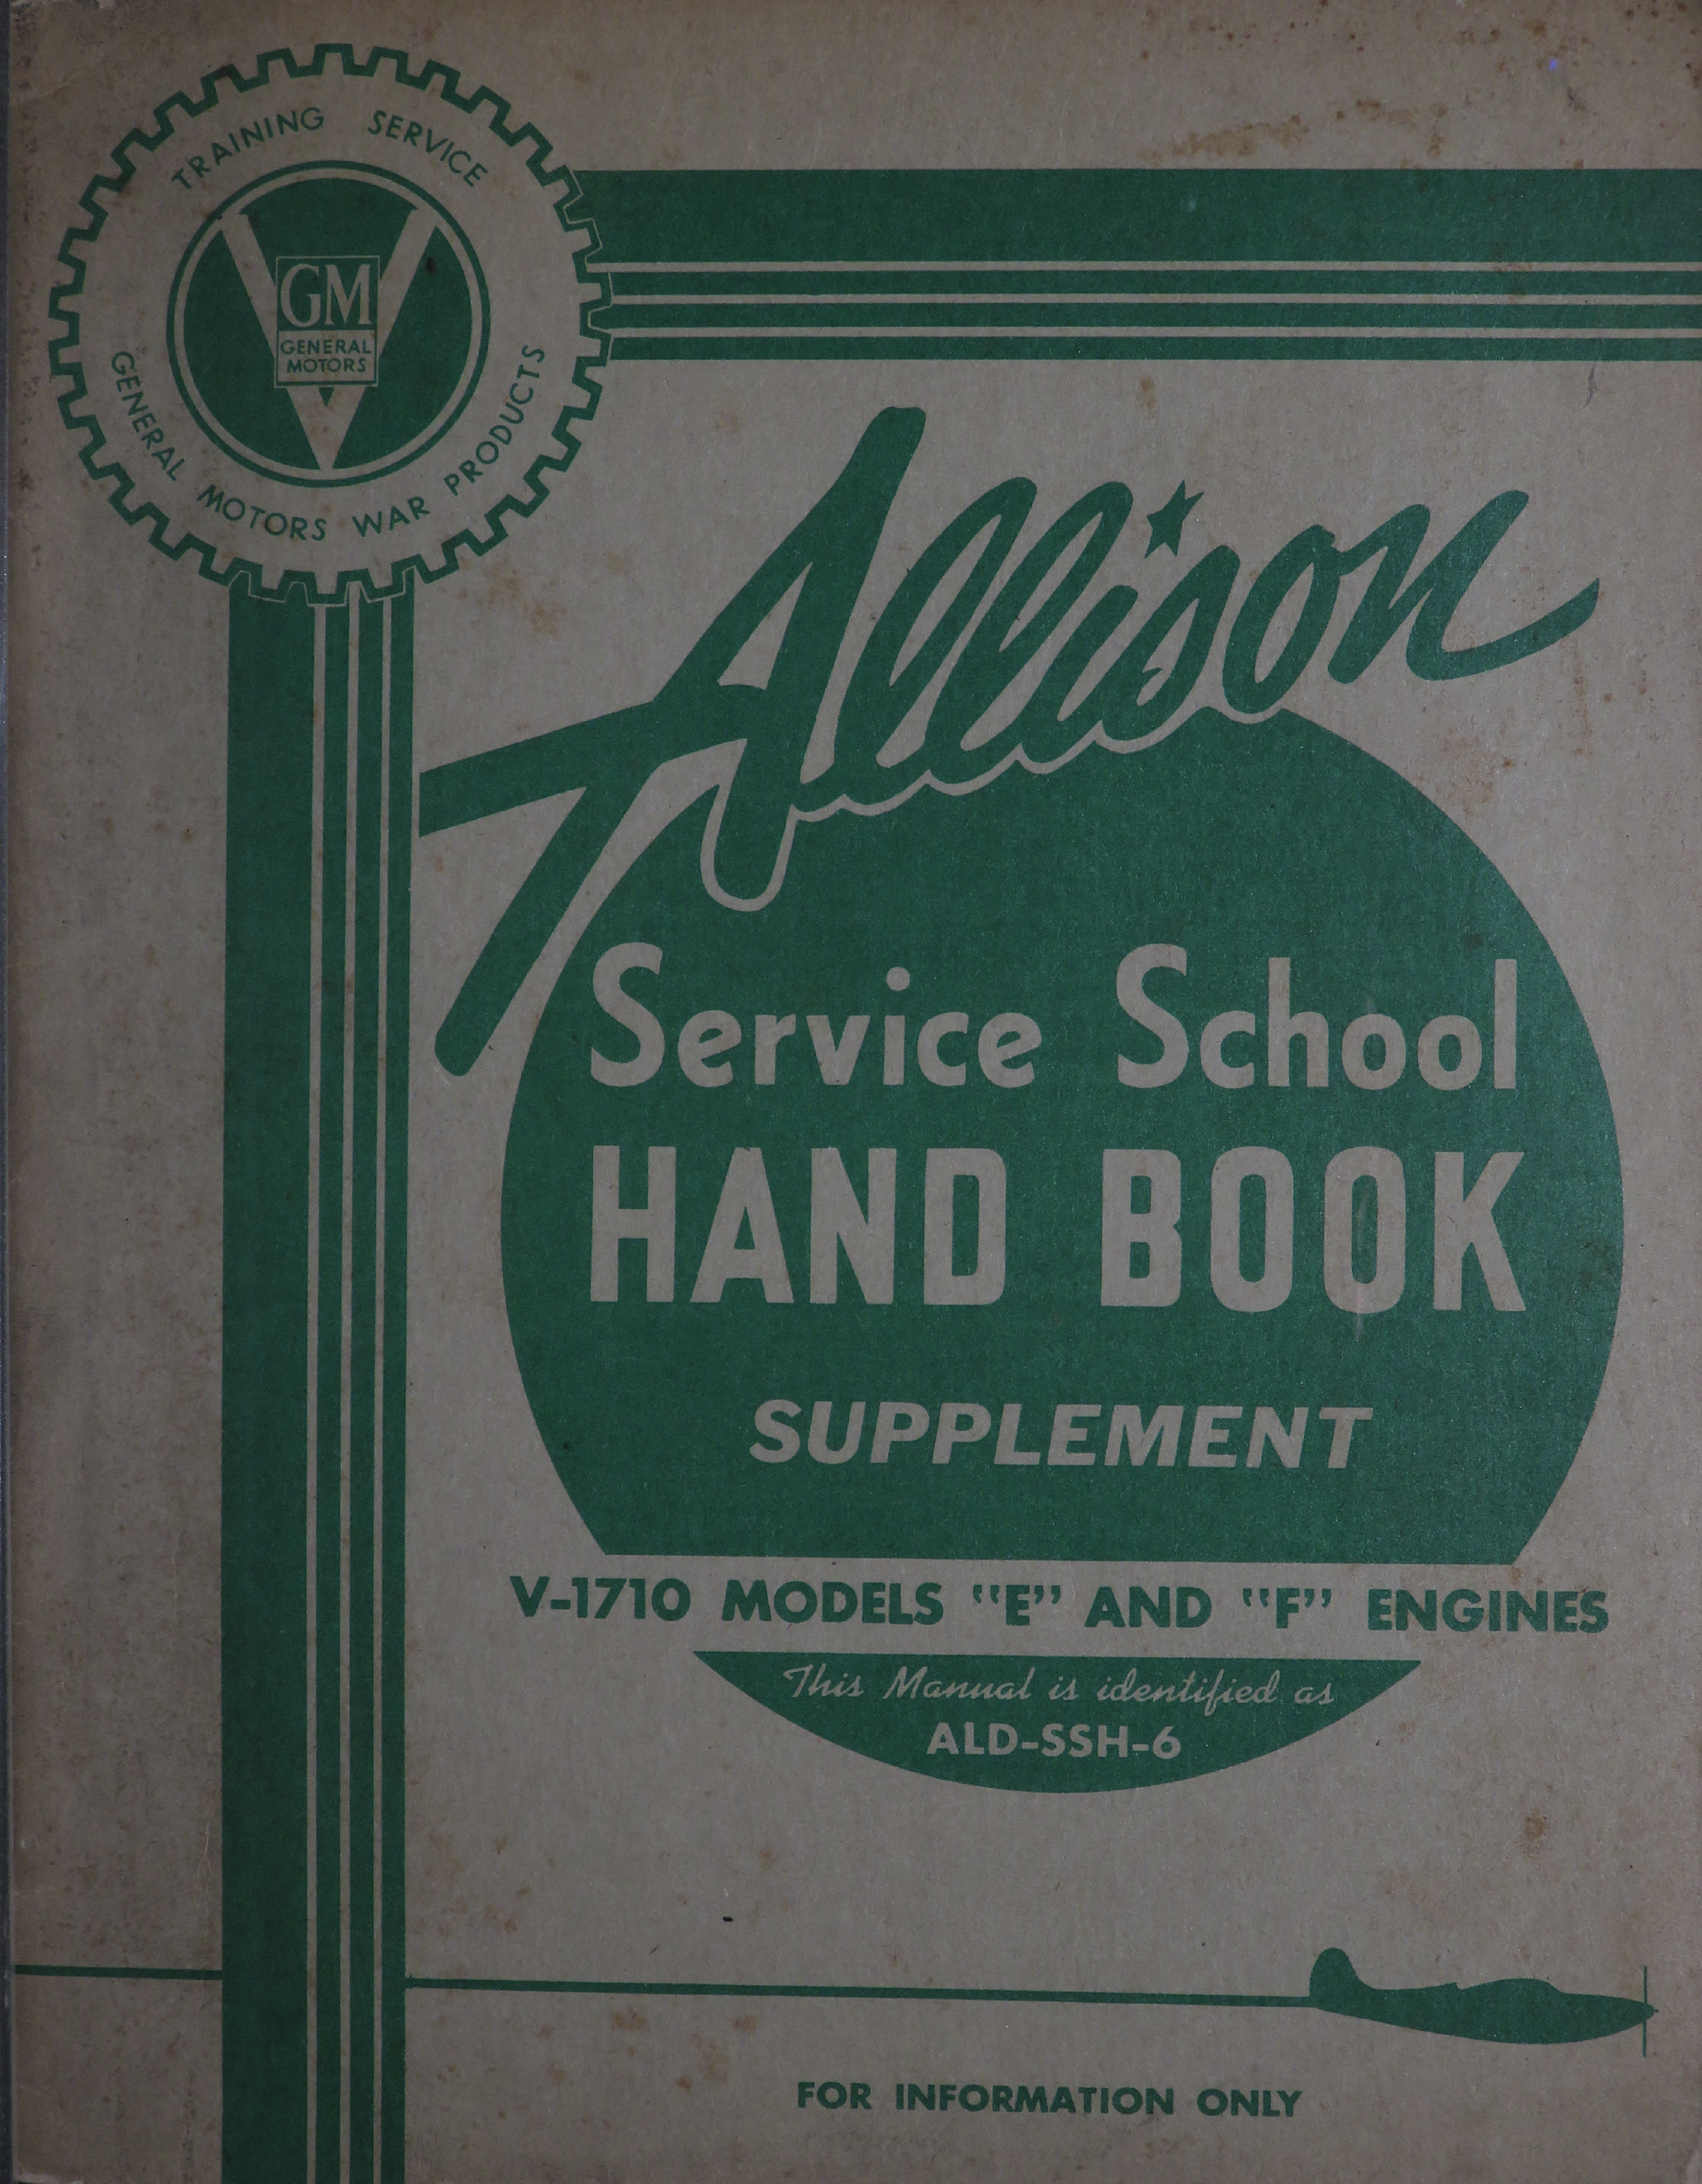 Sample page 1 from AirCorps Library document: Allison Service School Handbook Supplement for V-1710 E and F